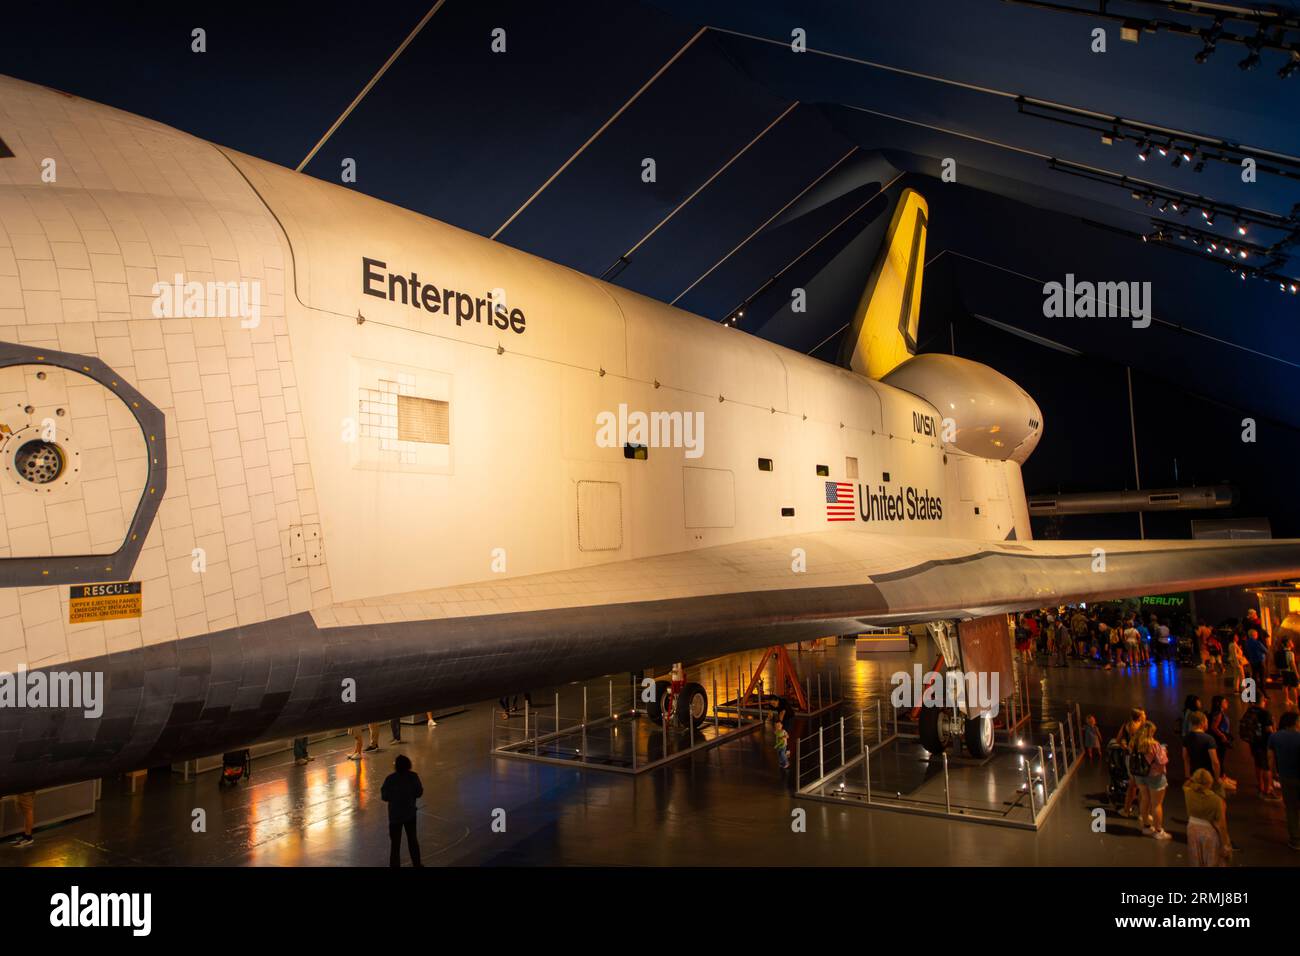 Space Shuttle Entreprise was the first orbiter of the Space Shuttle system. It is displayed on Intrepid Aircraft Carrier in Manhattan, New York City. Stock Photo